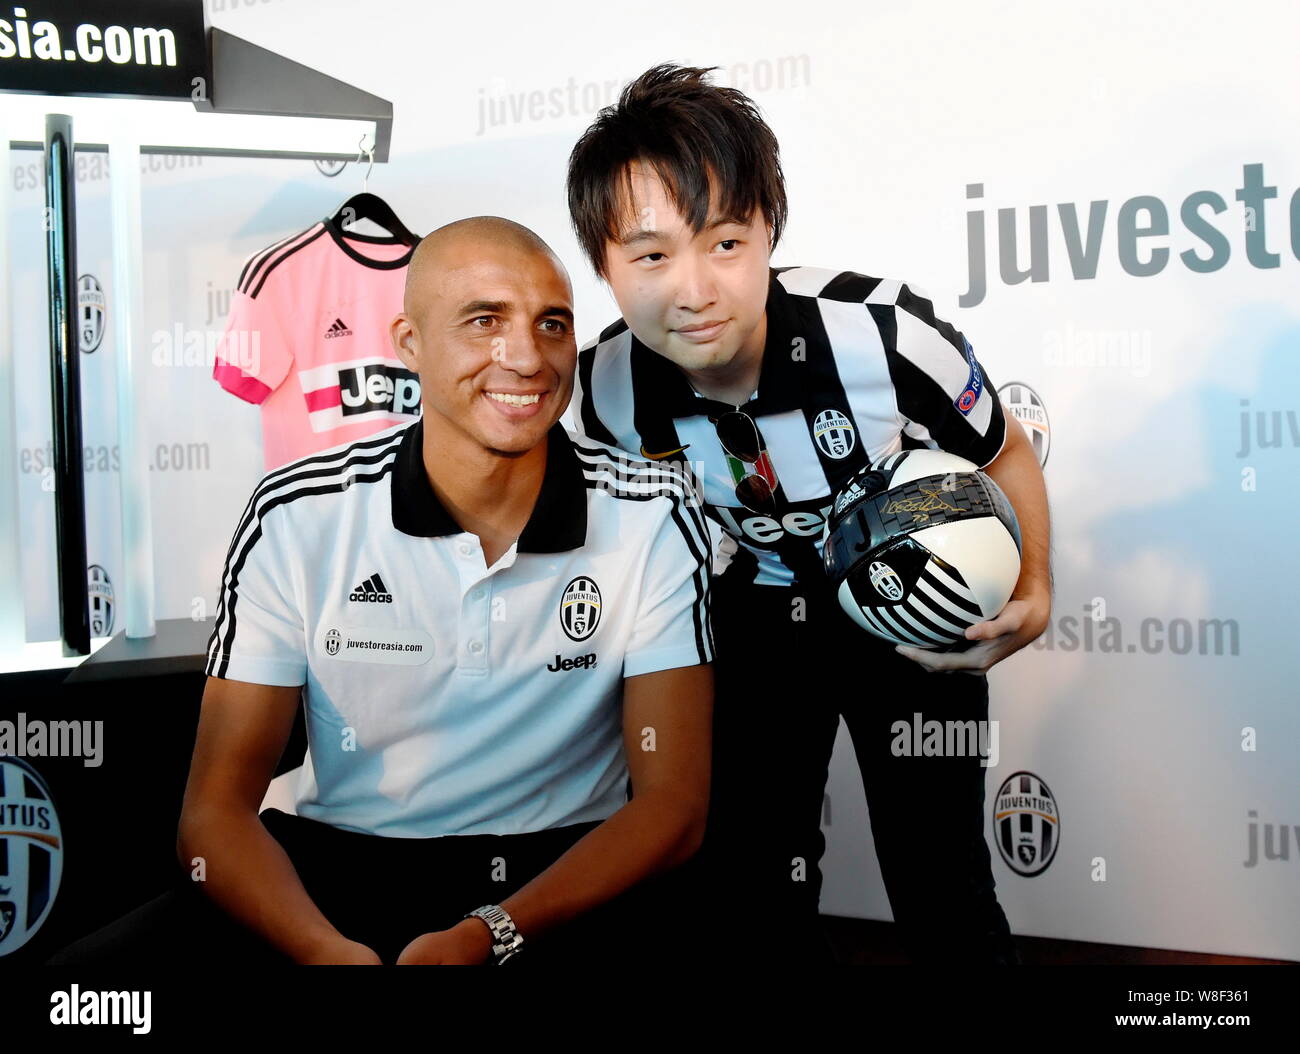 Former Juventus soccer star David Trezeguet, left, poses with a football  fan at an official launch event for Juventus' Asian online store  juvestoreasi Stock Photo - Alamy